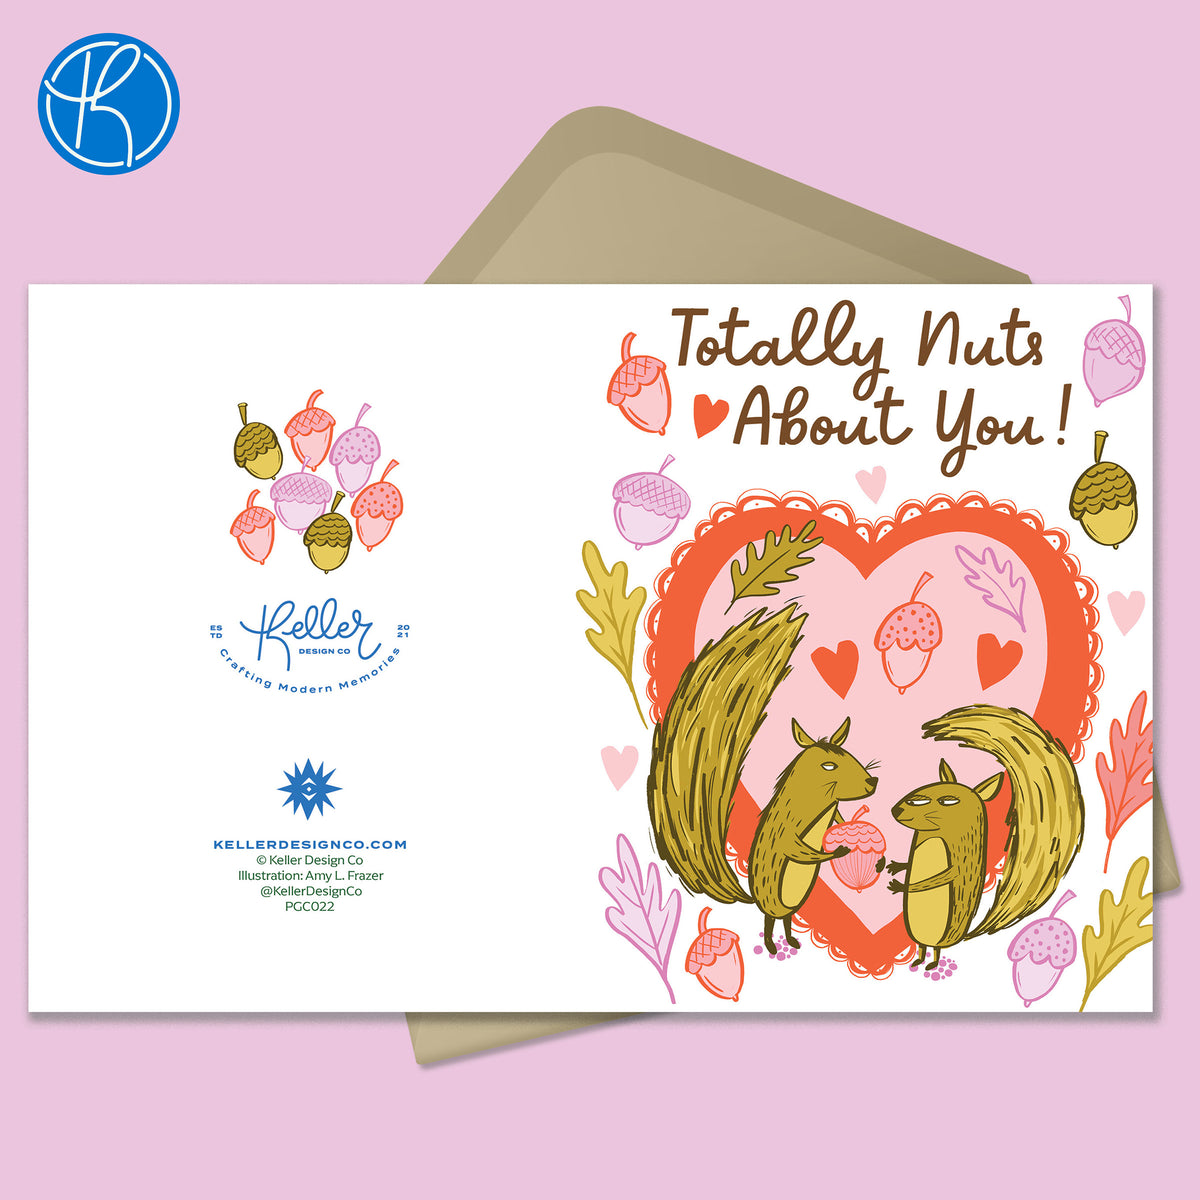 Valentine and love card featuring a squirrel giving another squirrel friend a  nut. In the background is a lacy heart shape and pink and purple nuts and leaves. Little hearts float around the card too. There is a kraft colored envelope in the background. 